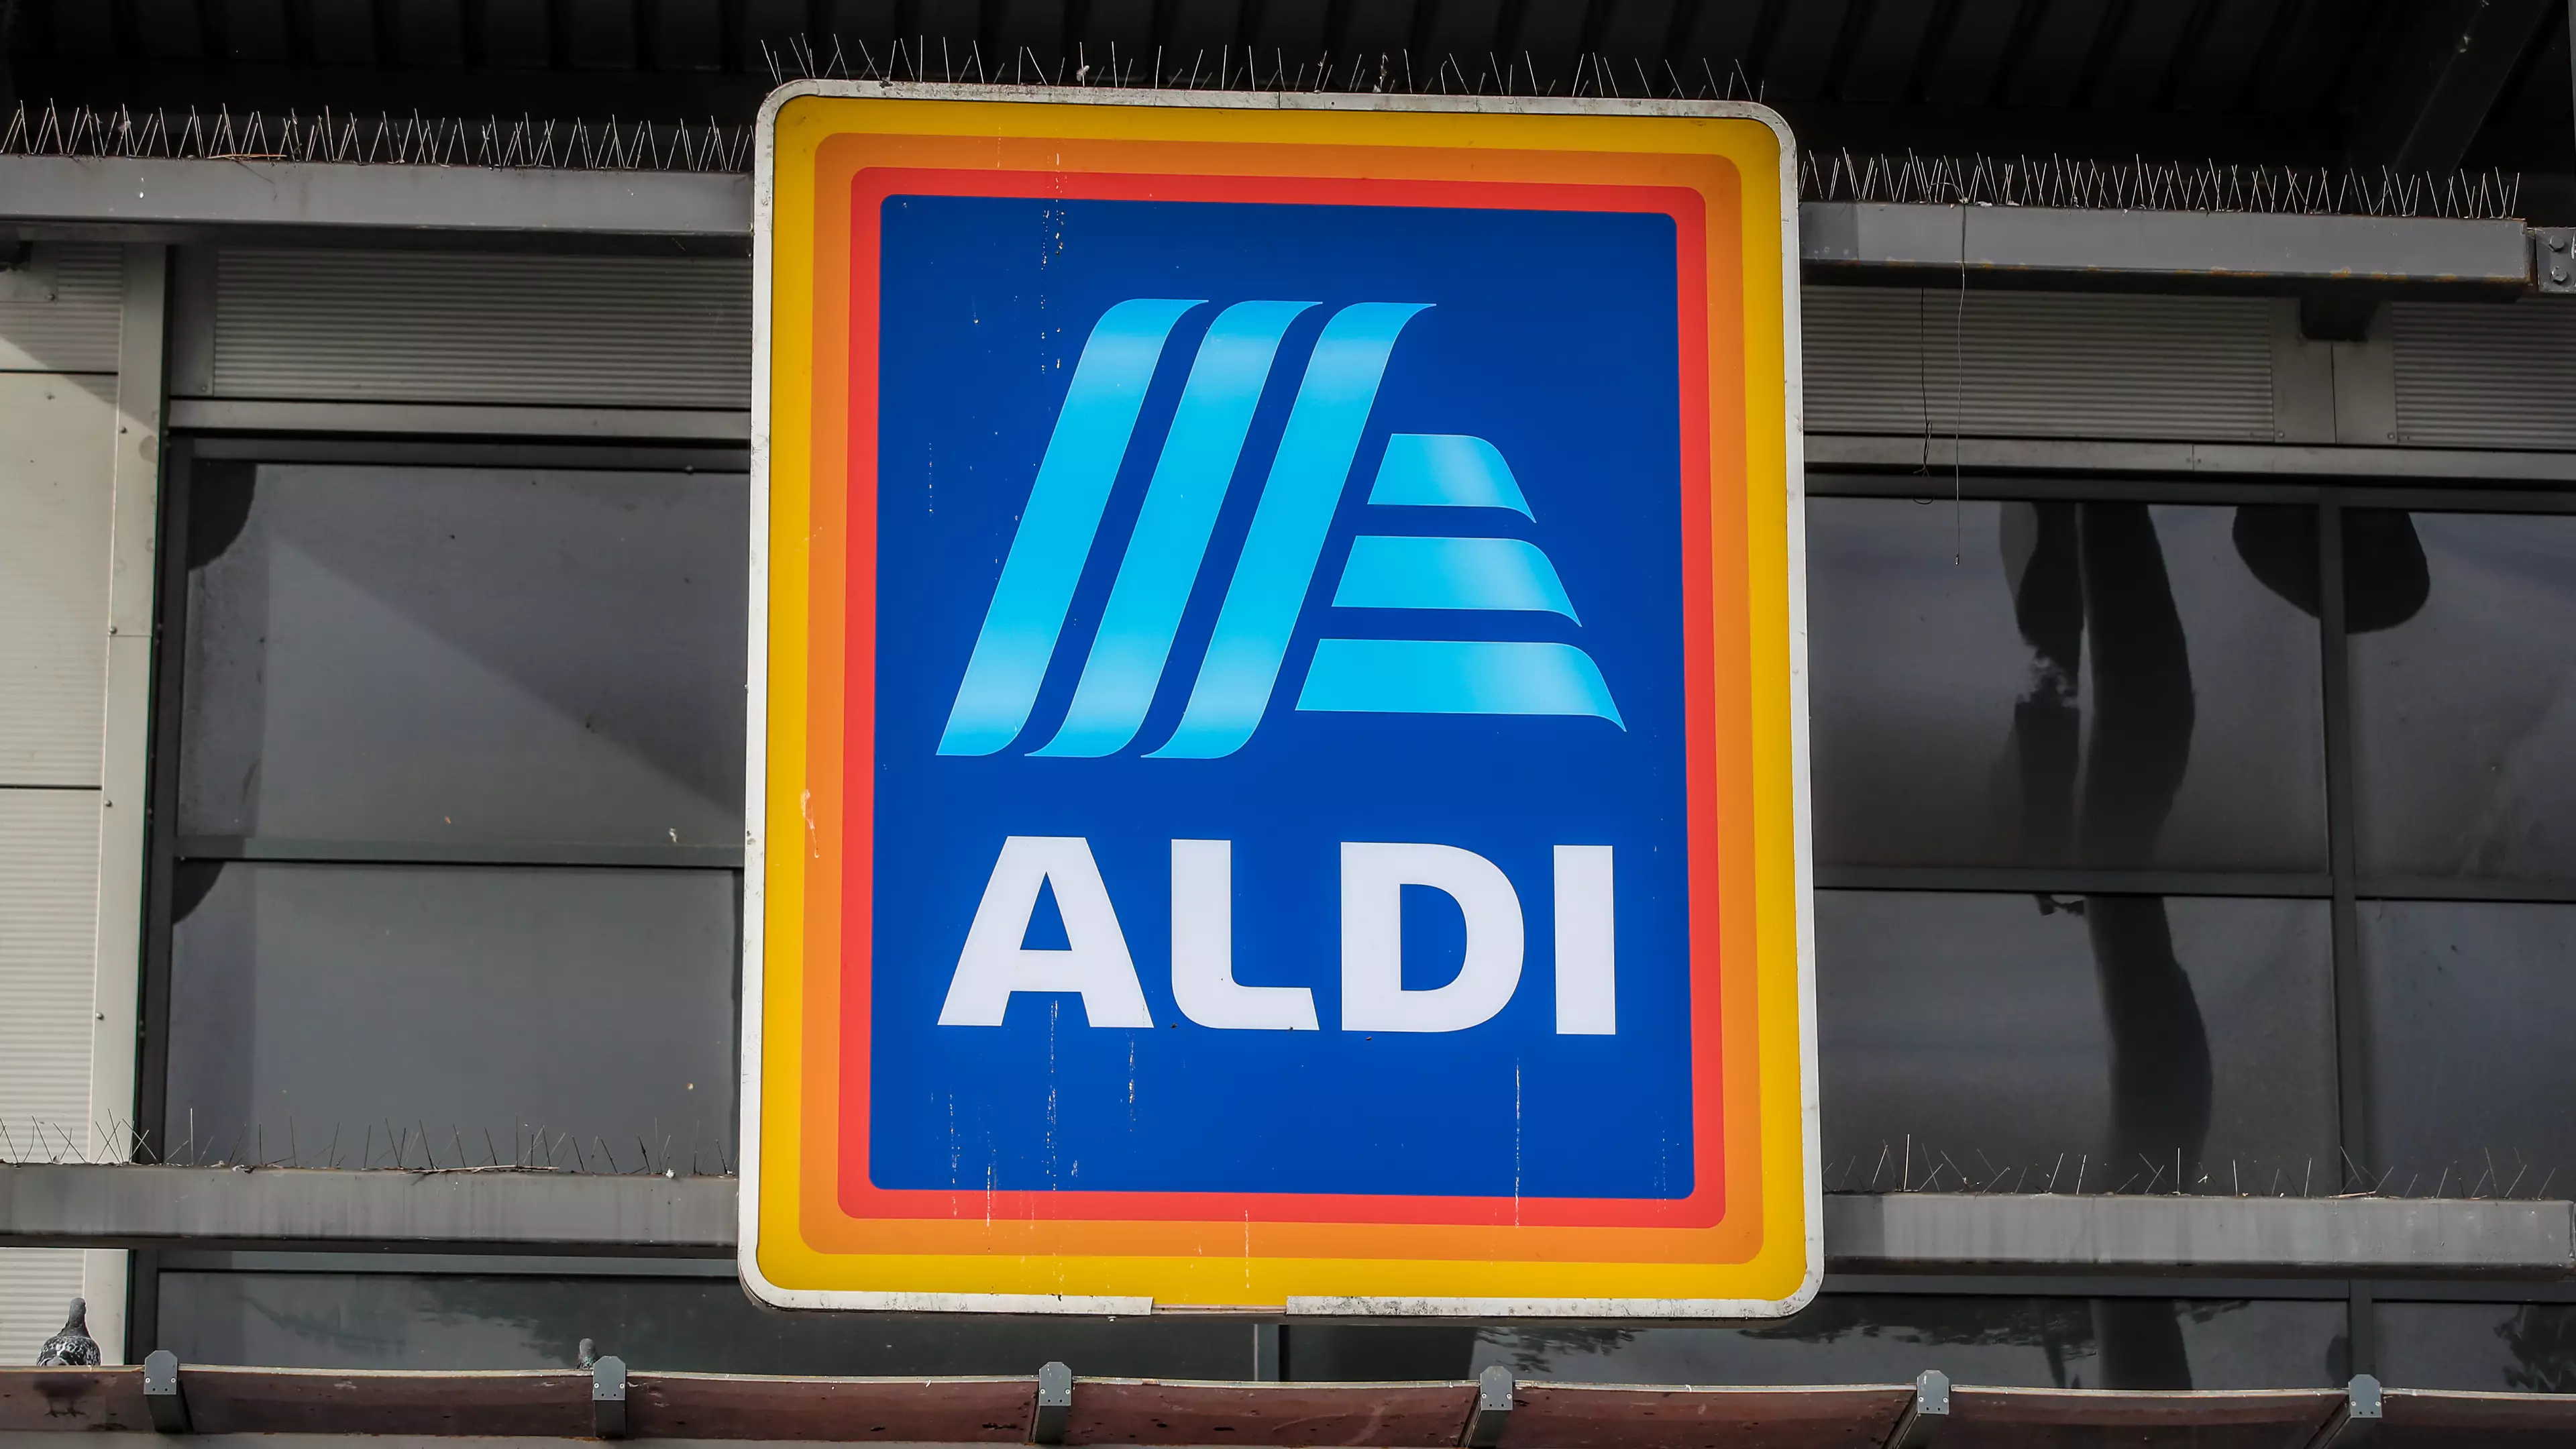 Aldi Introduces Restrictions On How Much Shoppers Can Buy To Prevent Stockpiling